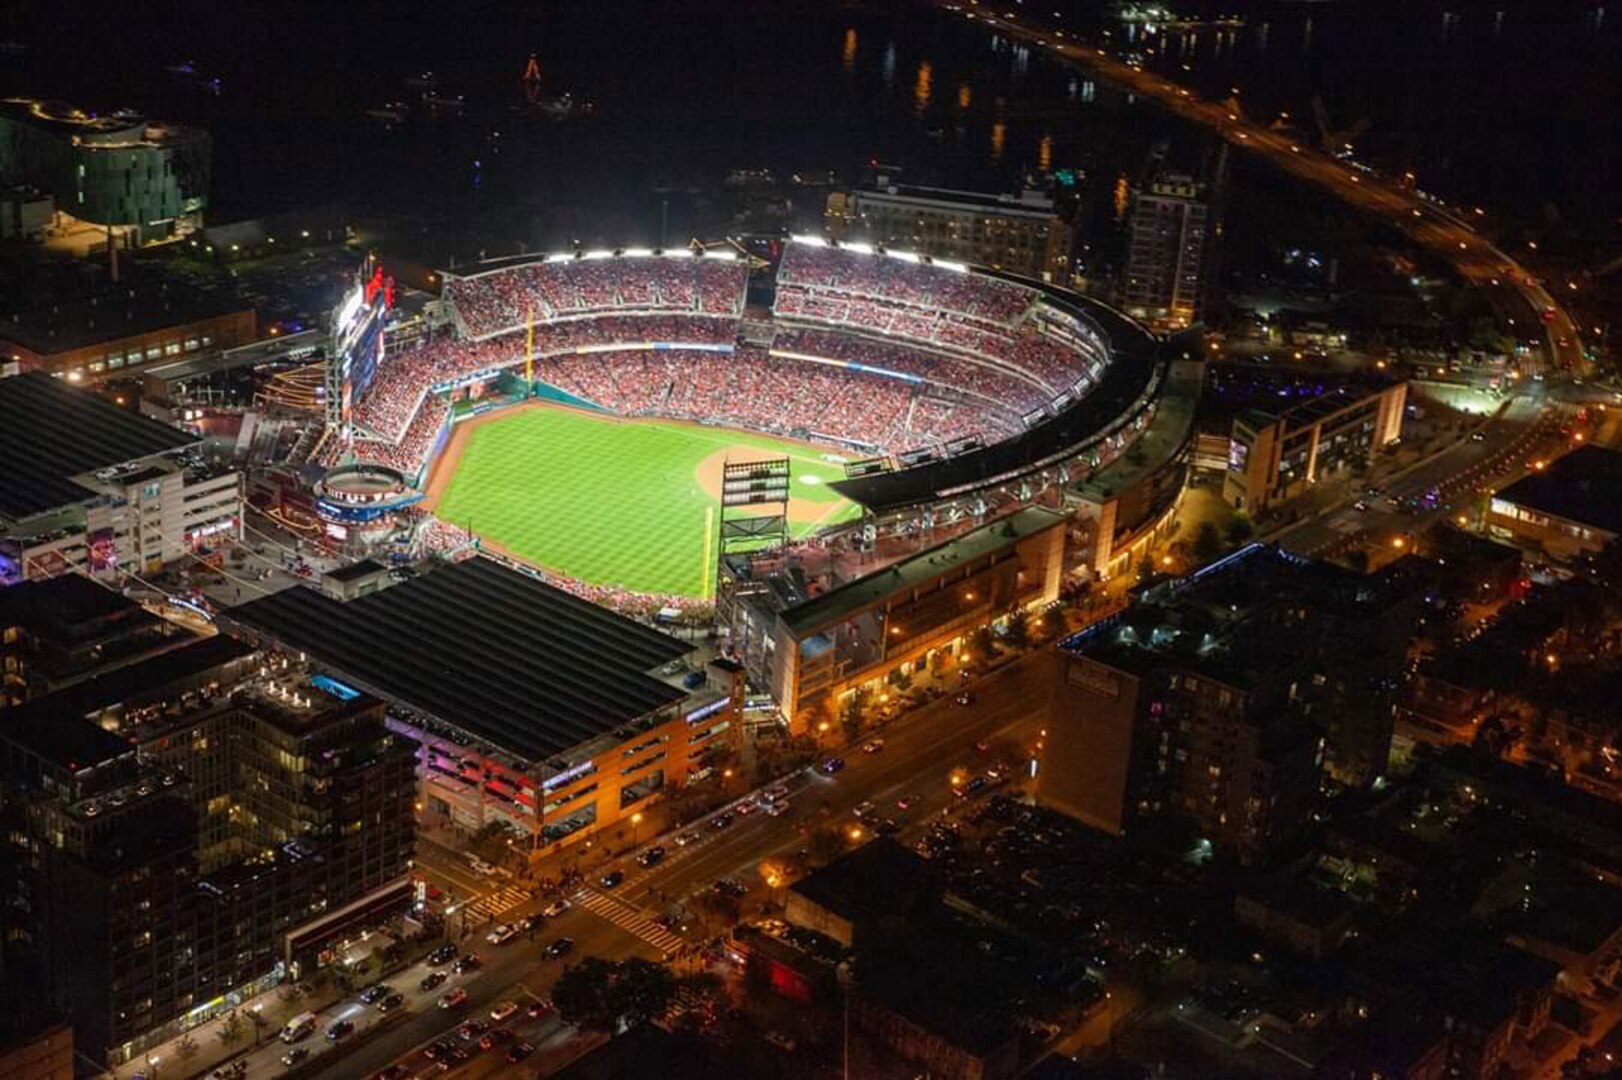 An aerial view shows a packed National’s Stadium during game five of the Major League Baseball World Series. In addition to supporting the Marine Corps Marathon, the District of Columbia National Guard’s 33rd Civil Support Team provided District officials support during the historic 2019 World Series baseball games at the National’s Stadium Oct. 25-27.